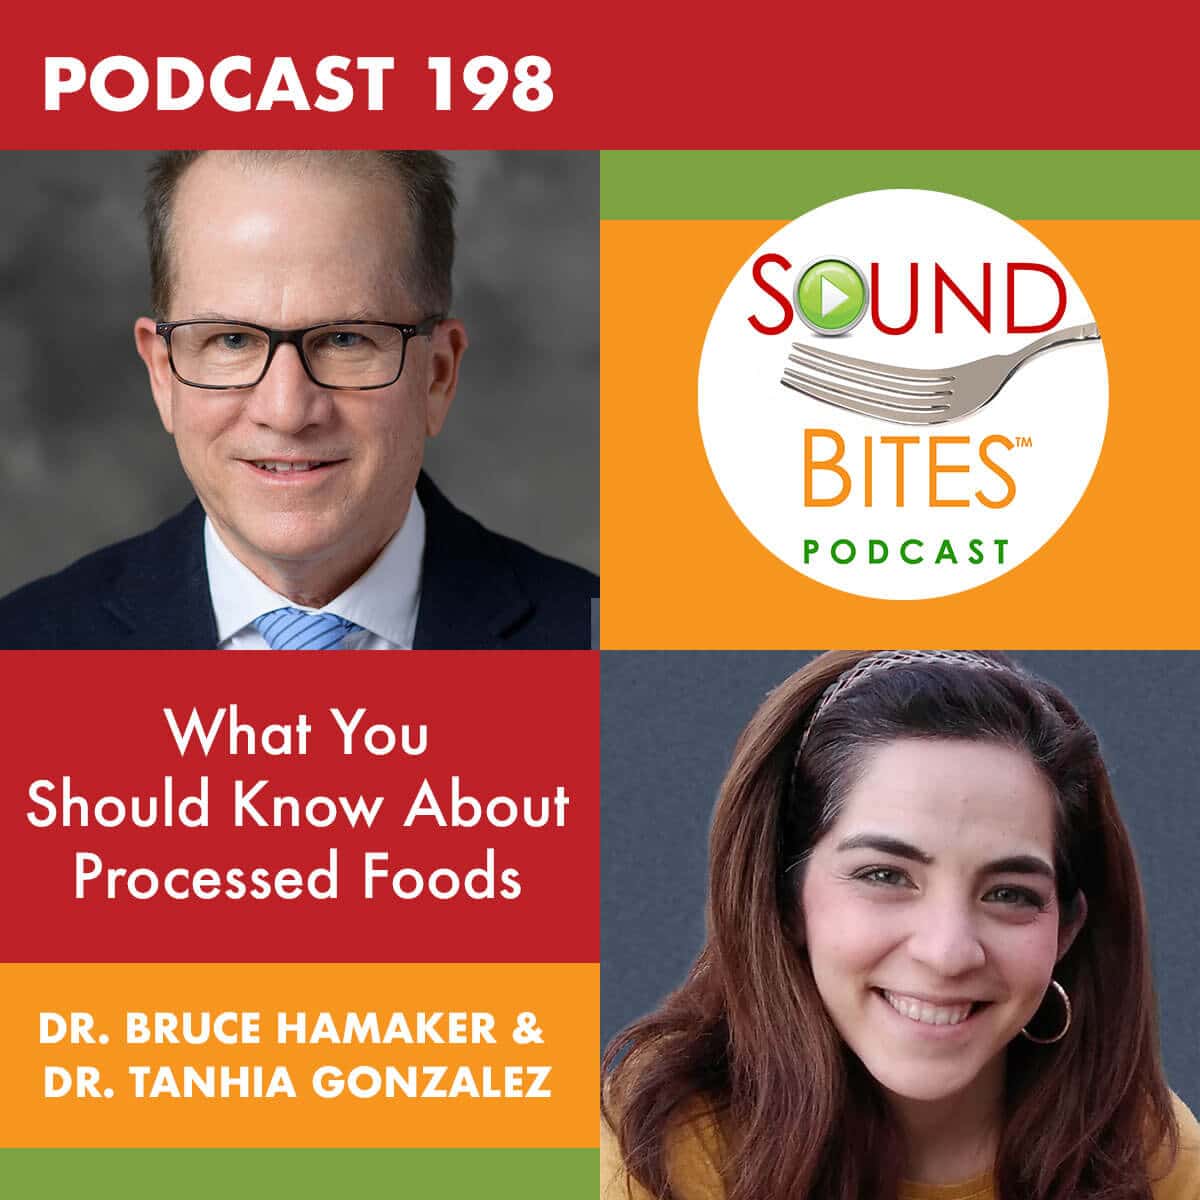 Podcast Episode 198: What You Should Know About Processed Foods – Dr. Bruce Hamaker & Dr. Tanhia Gonzalez